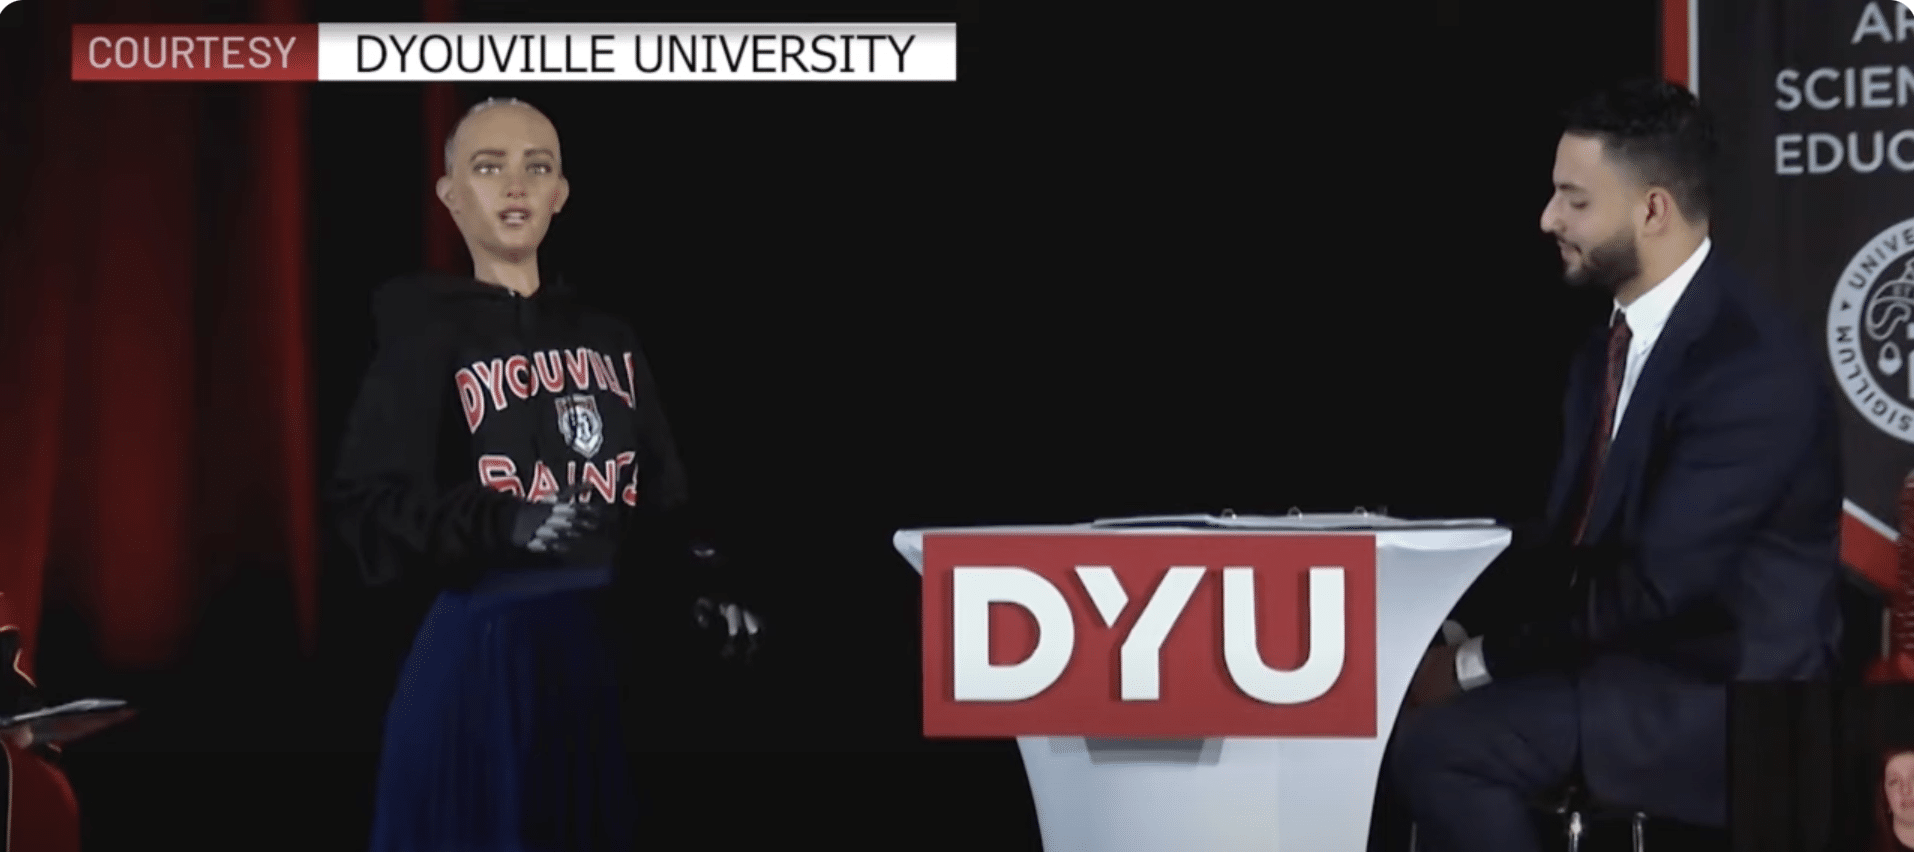 Human-like robot tells students to ‘take risks’ in creepy graduation speech – it even responded to ‘haters’